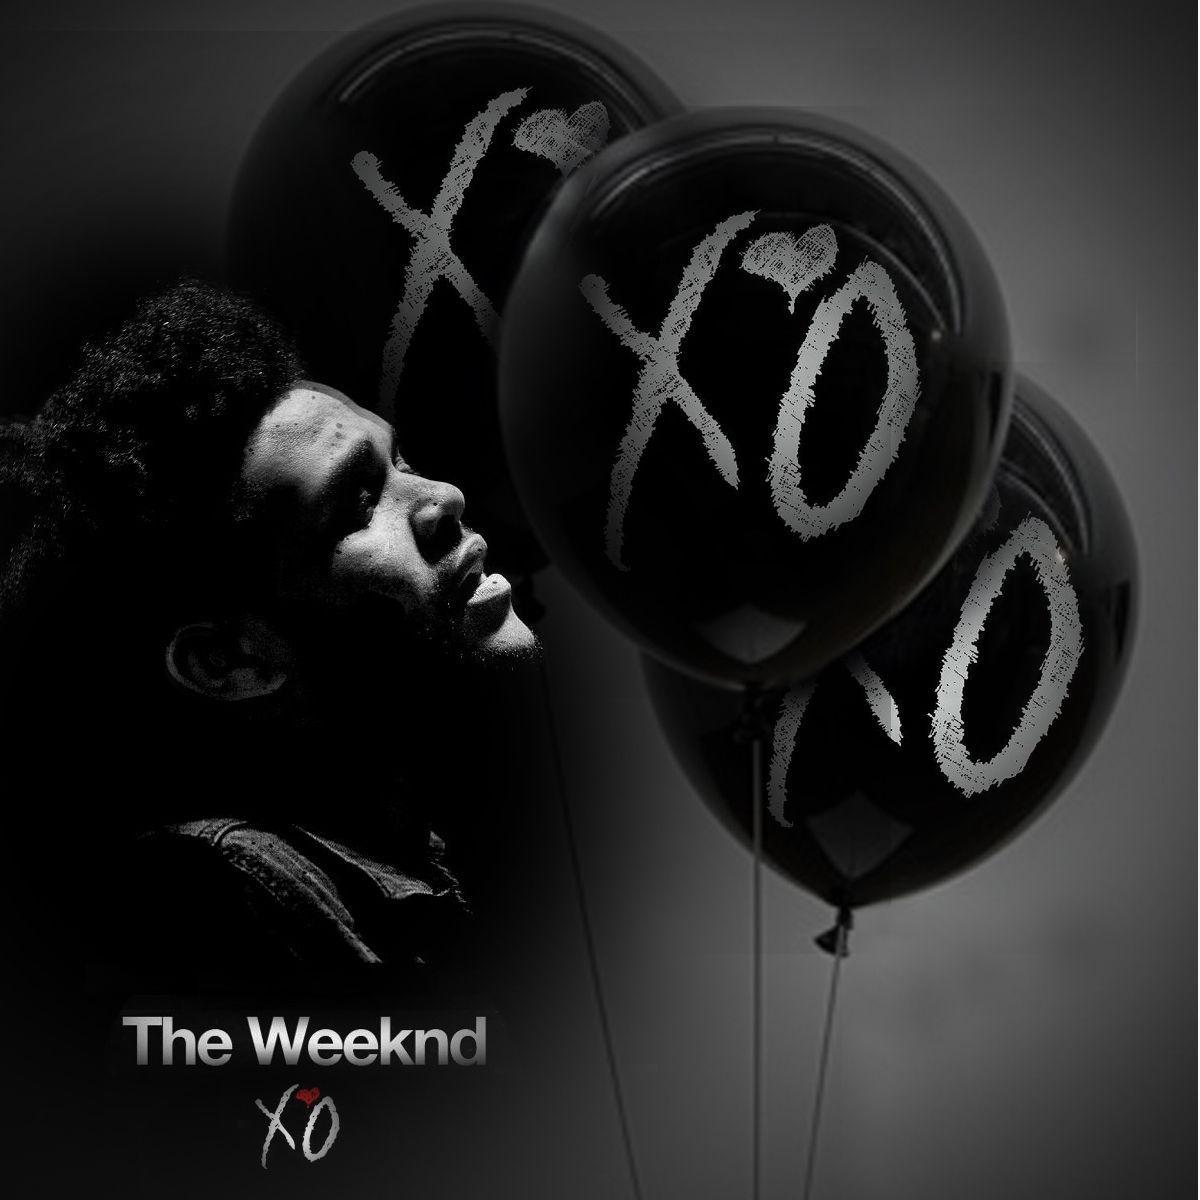 Similiar House Of Balloons The Weeknd Wallpaper Keywords